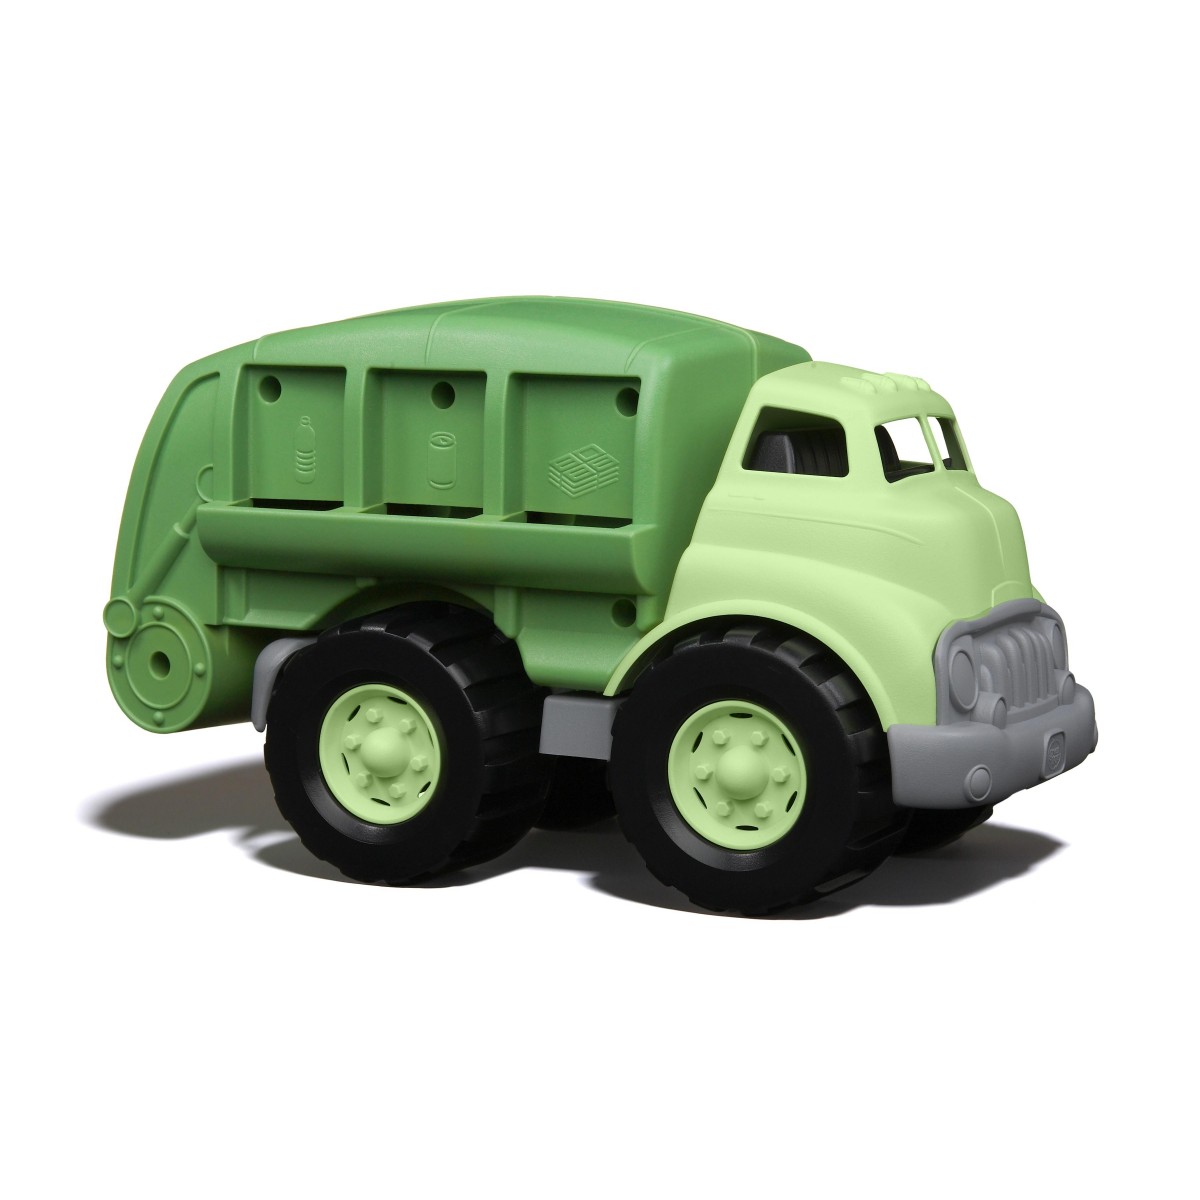 green toy recycling truck